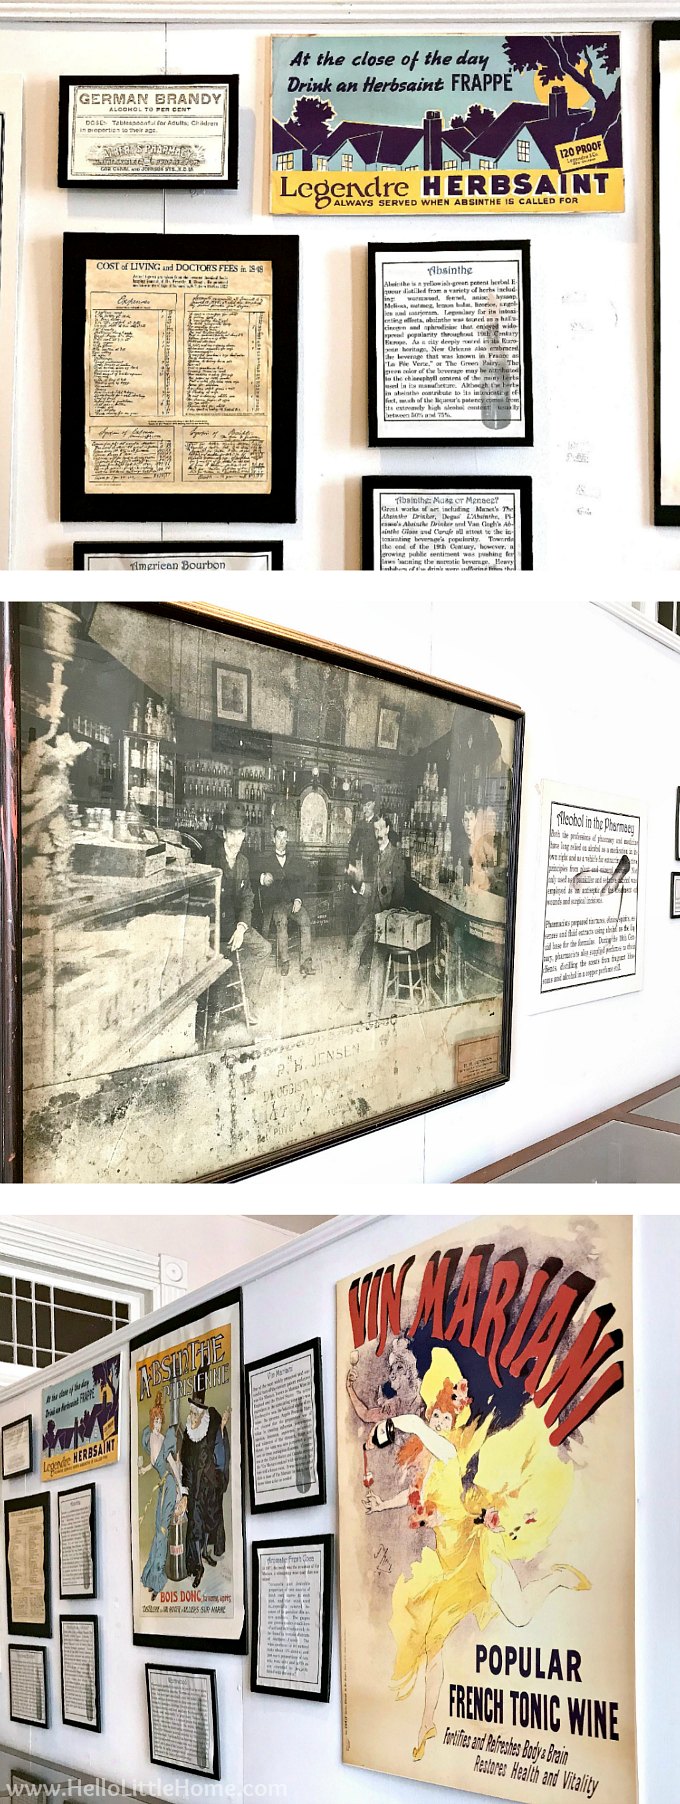 A photo collage showing different photos and exhibits hanging on the museum walls.